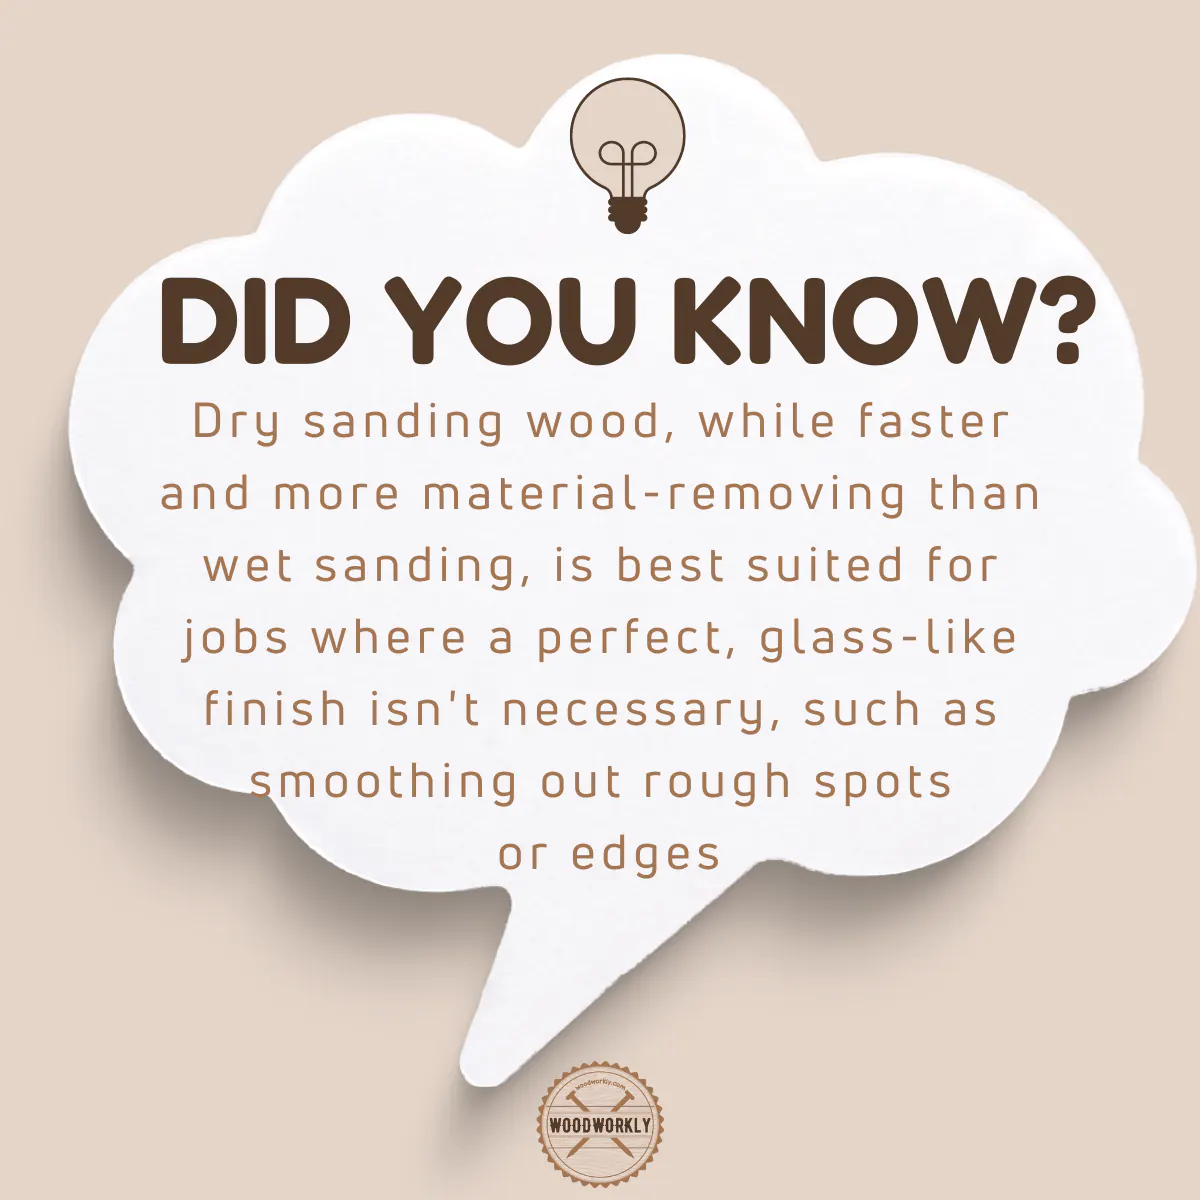 Did you know fact about Dry sanding wood